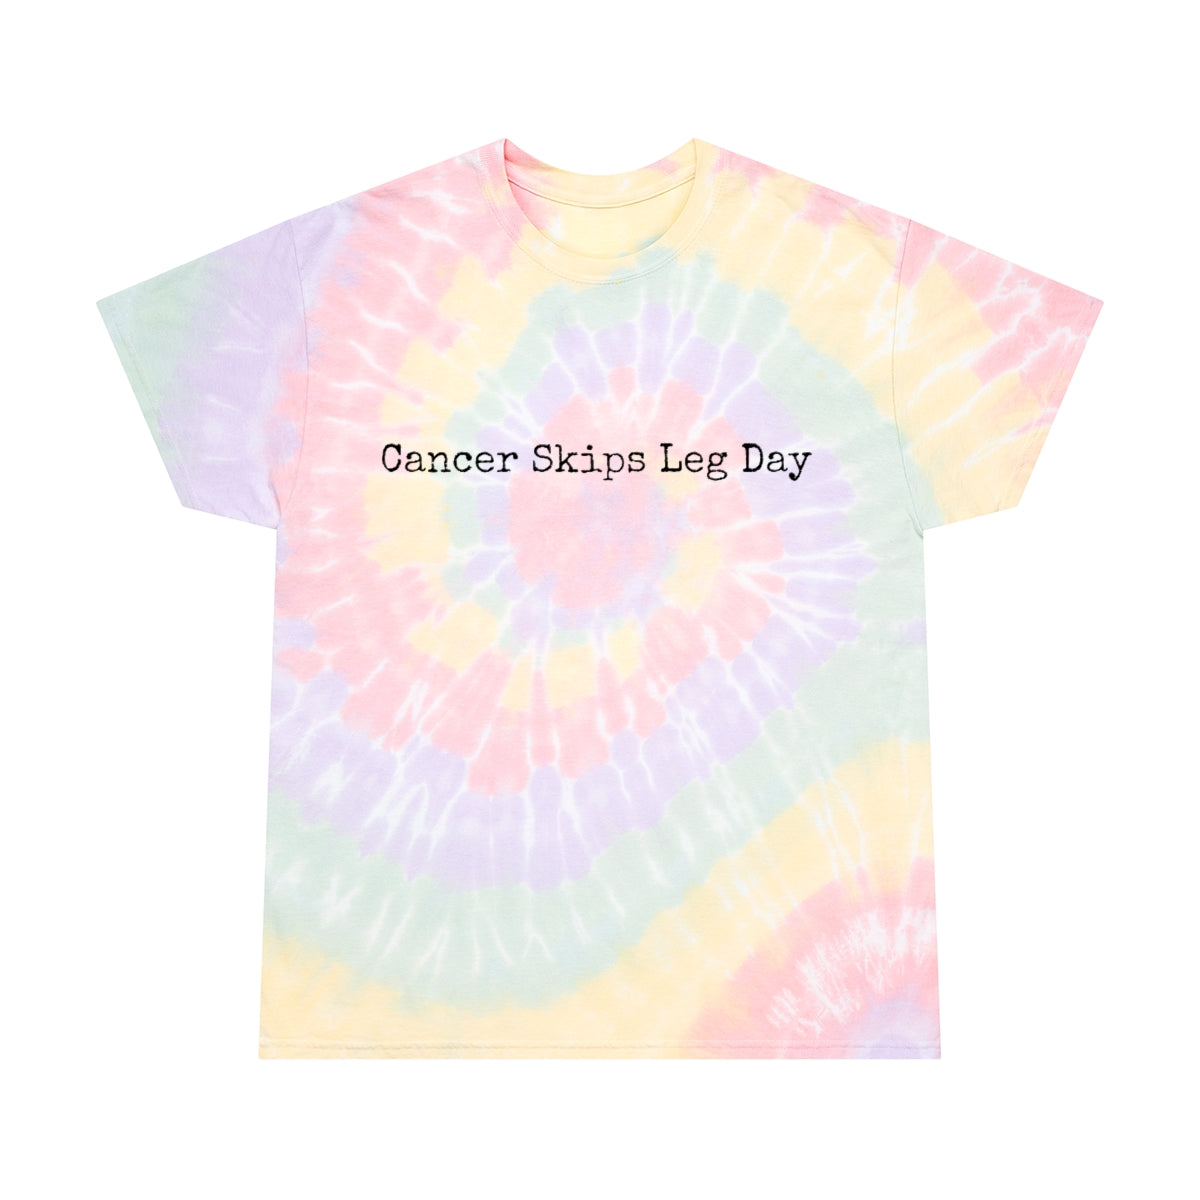 Tie-Dye Tee, Spiral Mens Womens T Shirt tshirt Anti Cancer Cancer is Dumb Survivor Support Humorous Funny Apparel Clothing